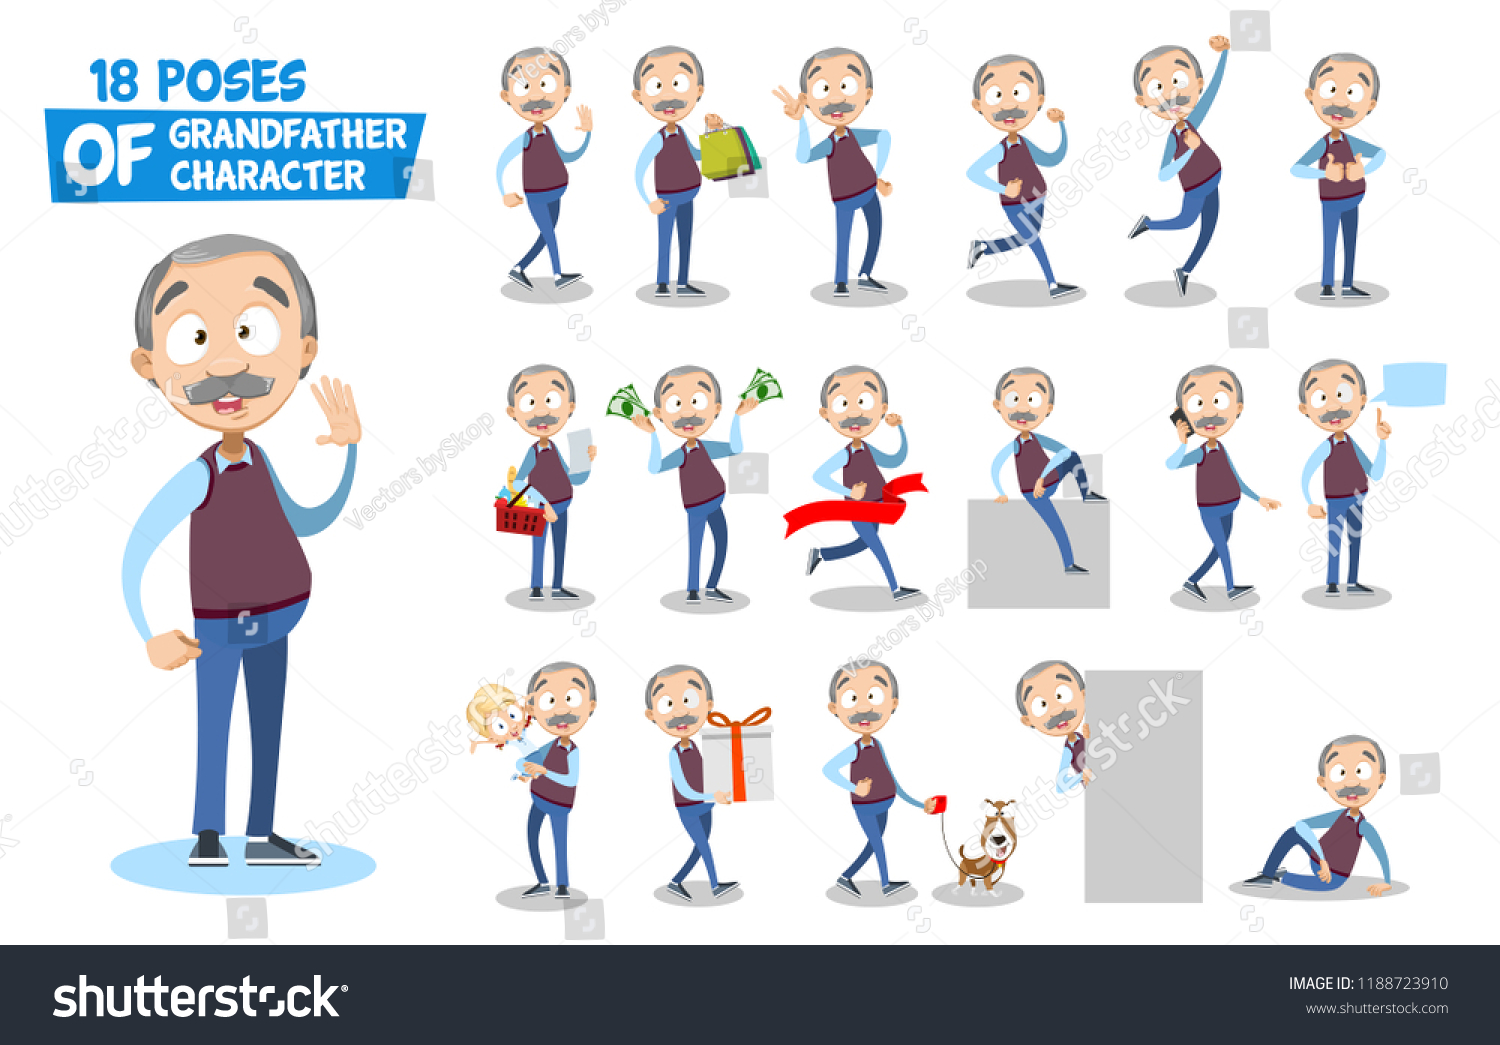 Grandpa character big animated set. Elderly man talking on mobile phone and shopping with basket. Holding grandchild and walking with dog. Grandfather various poses and gestures vector illustration #1188723910